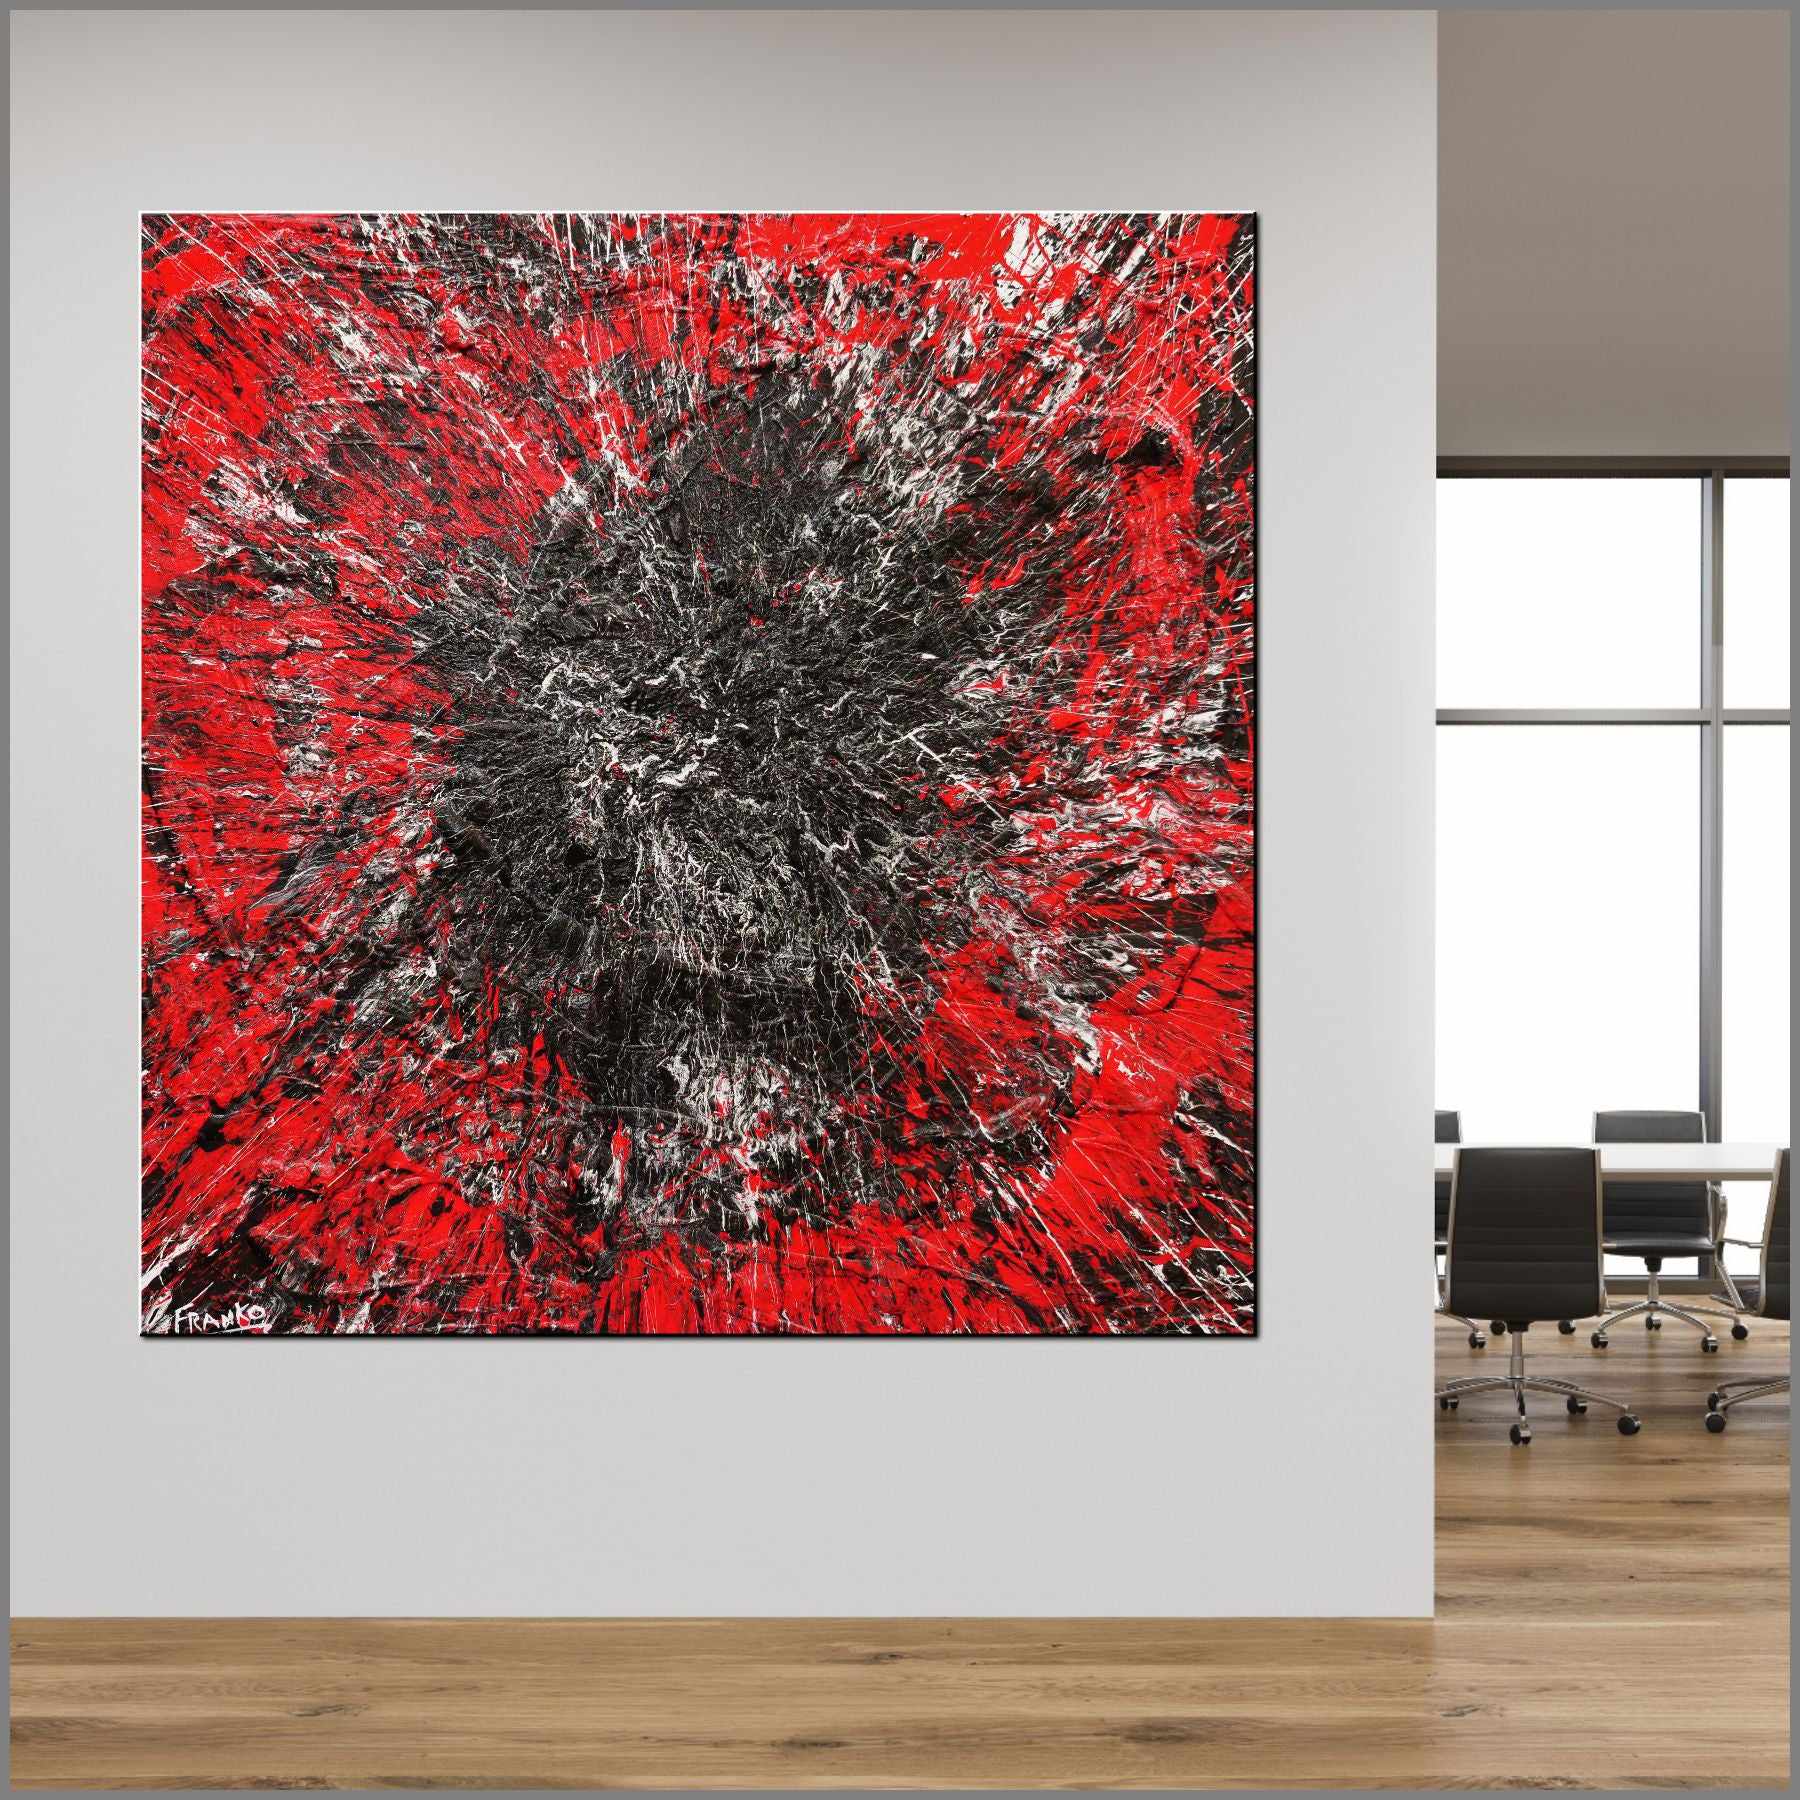 Orgasmic 120cm x 120cm Red Black White Textured Abstract Painting-Abstract-[Franko]-[Artist]-[Australia]-[Painting]-Franklin Art Studio